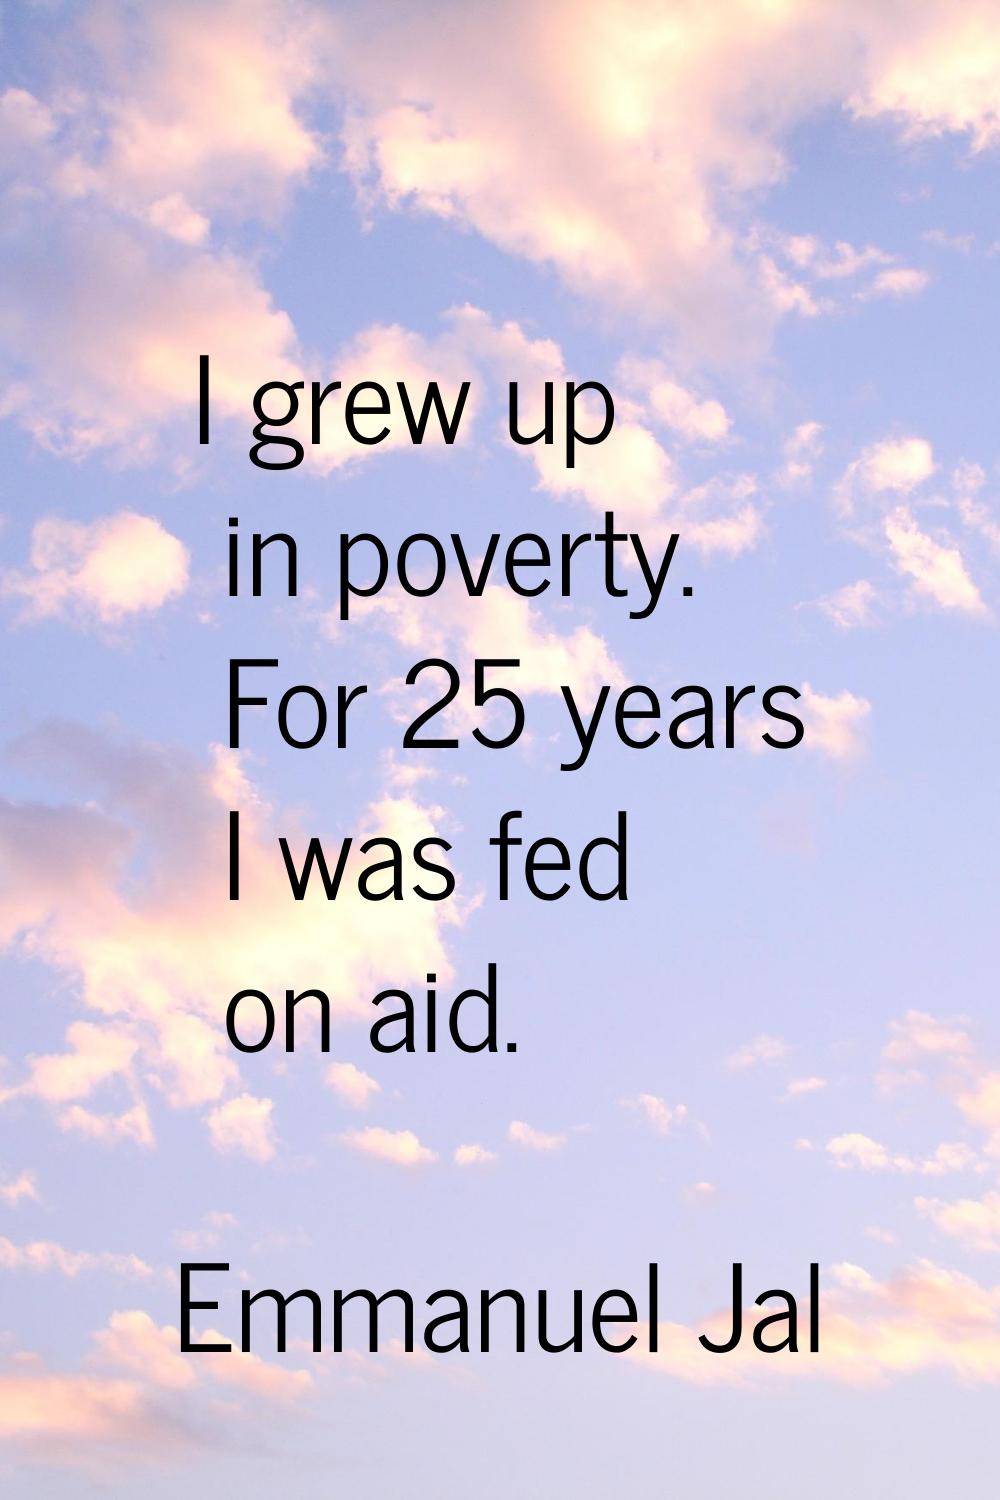 I grew up in poverty. For 25 years I was fed on aid.